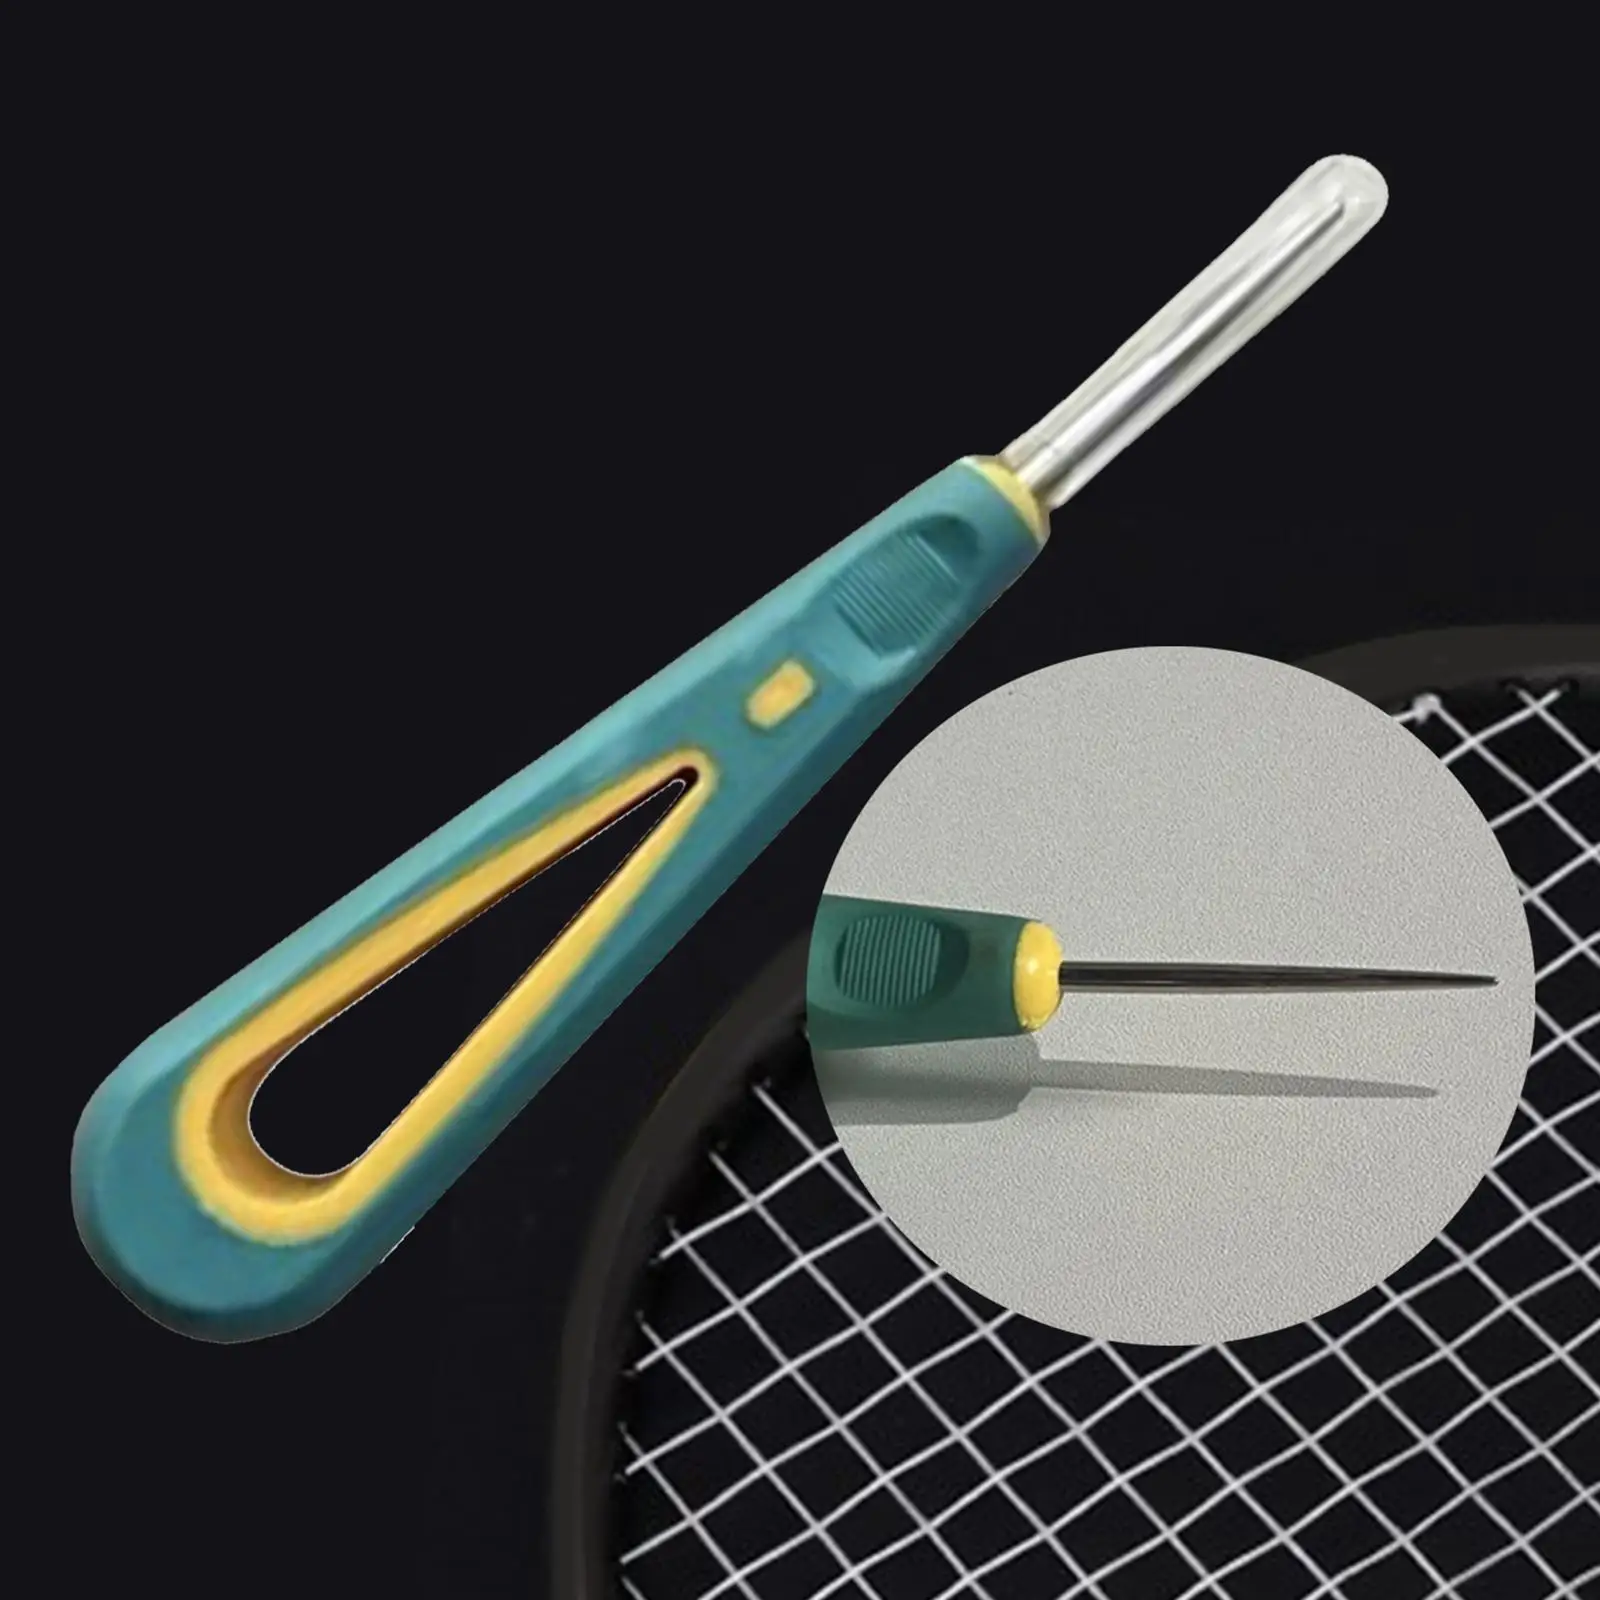 Strong Badminton Racket Stringing Straight Awl Stringing Machine Tools Portable Sewing Awl for Tennis and Badminton Racket